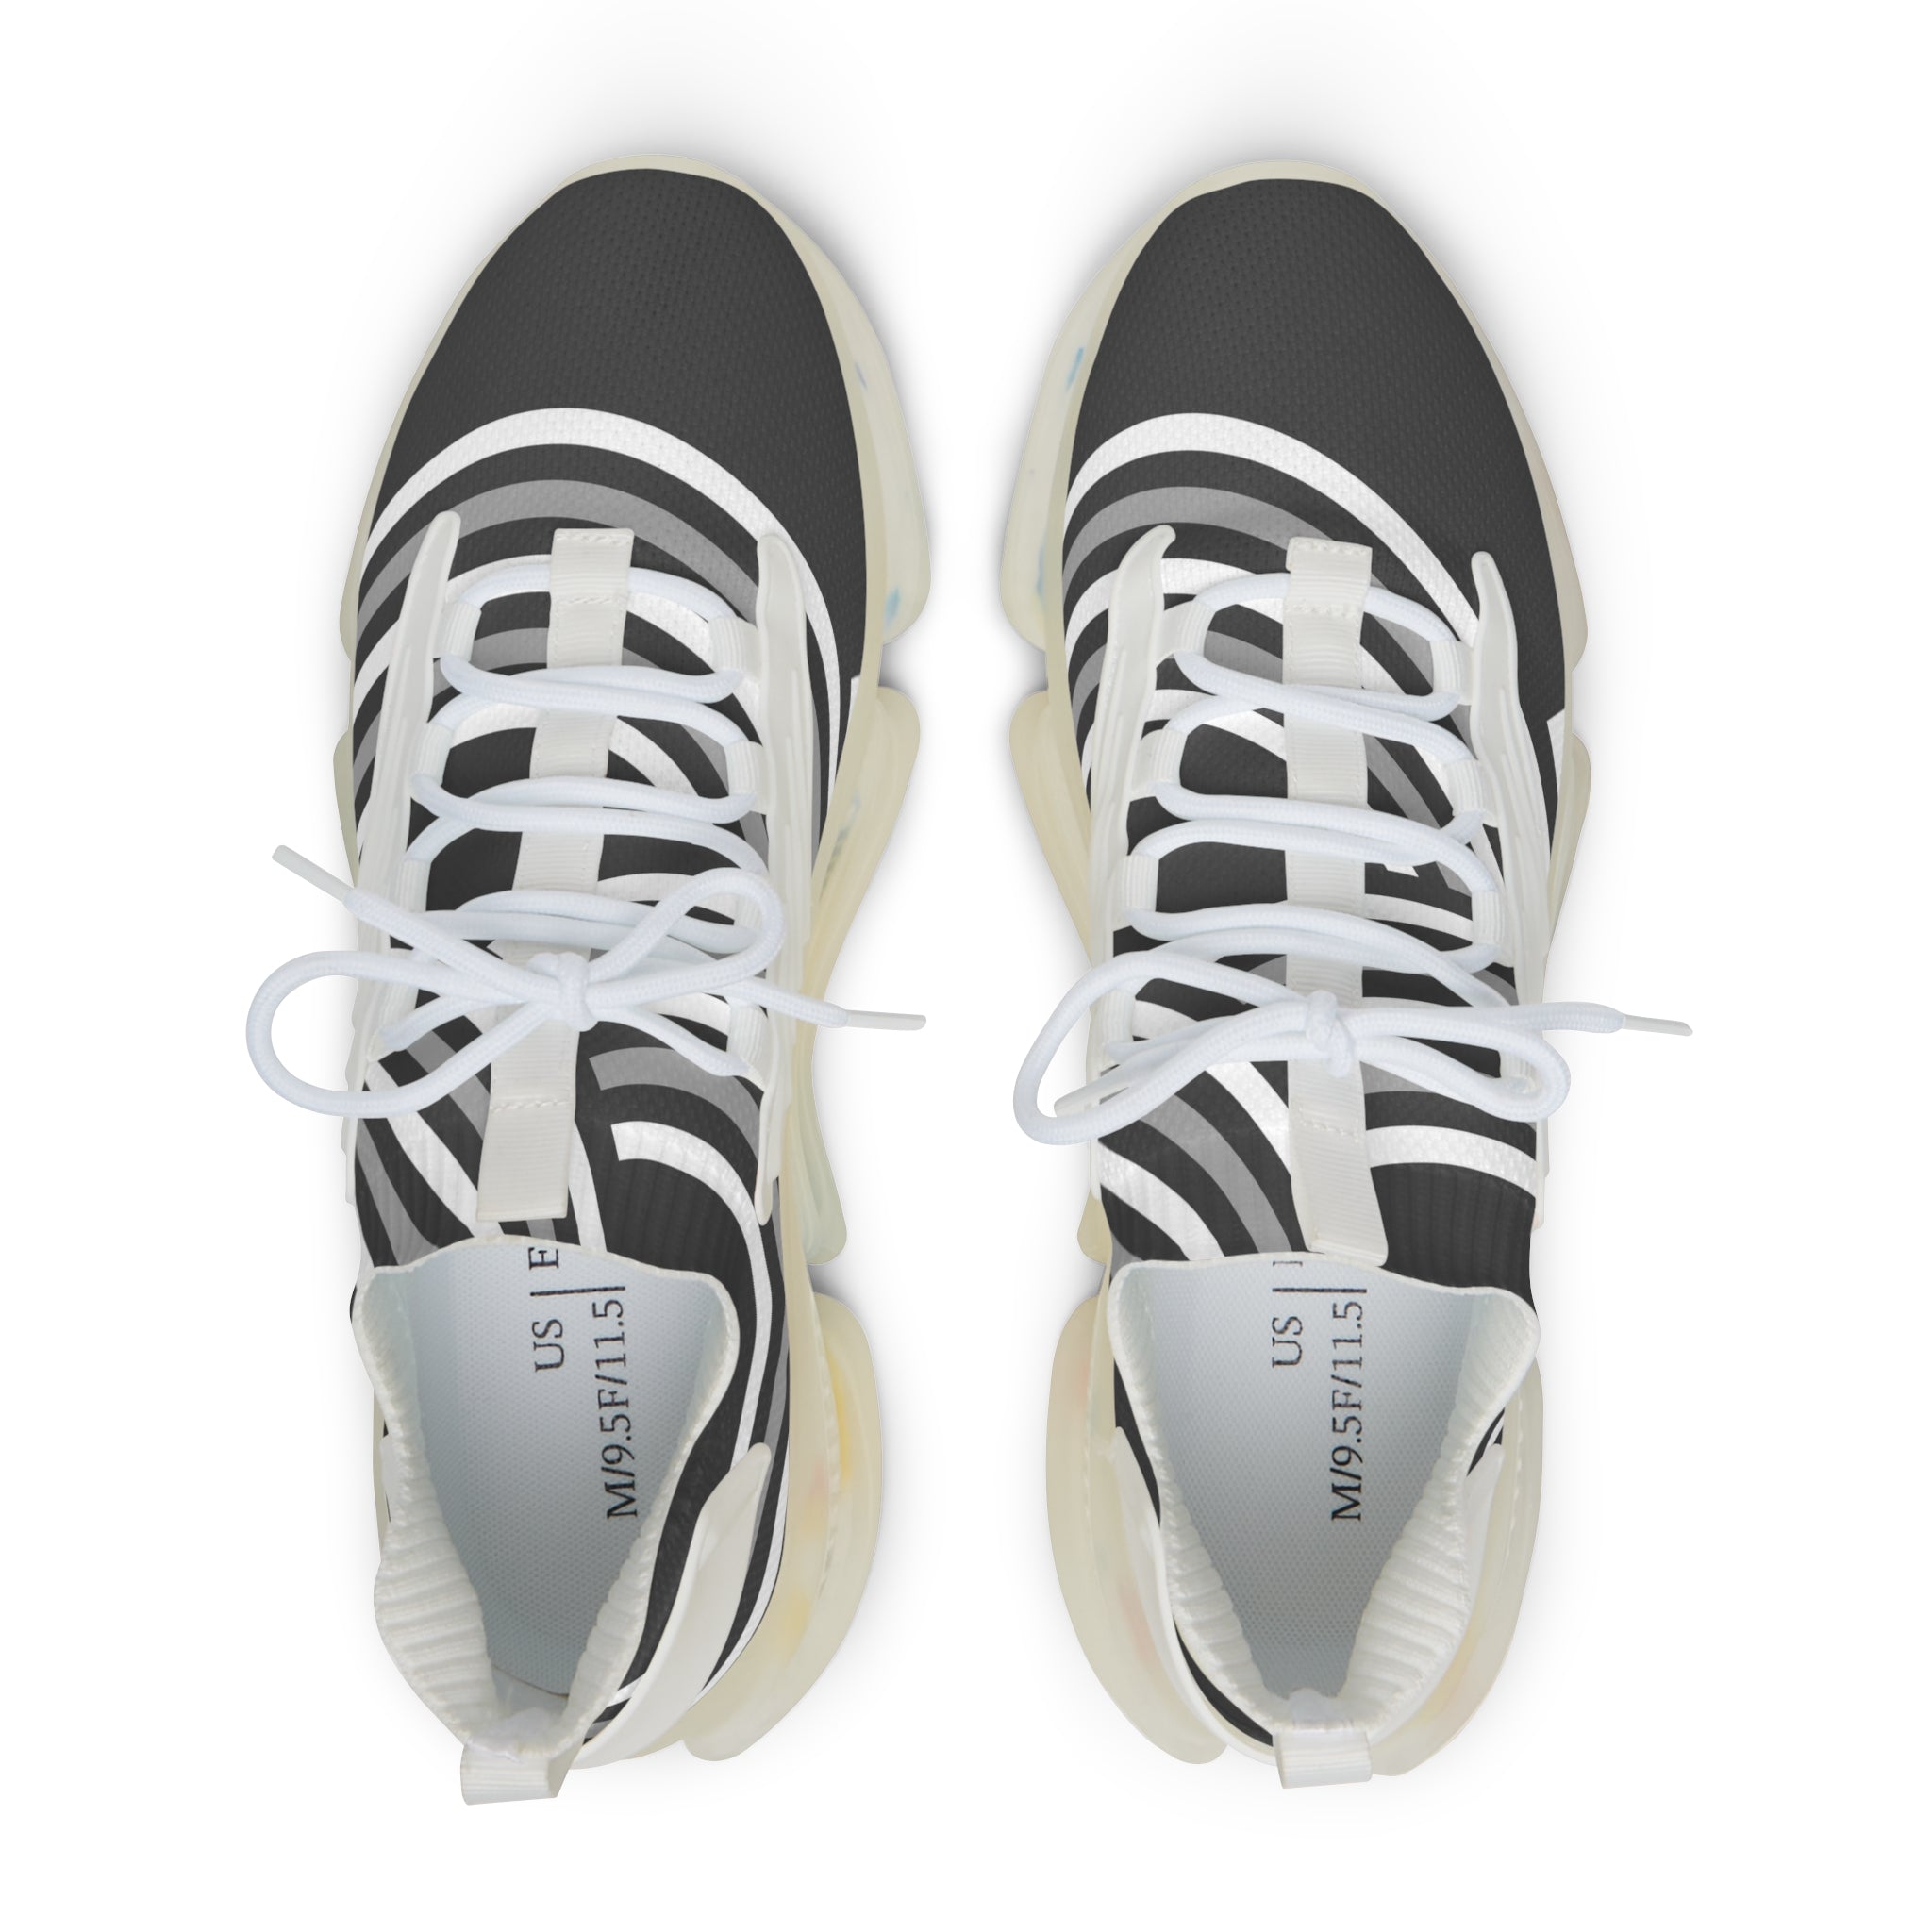 The Sonh' Day Men's Sneakers